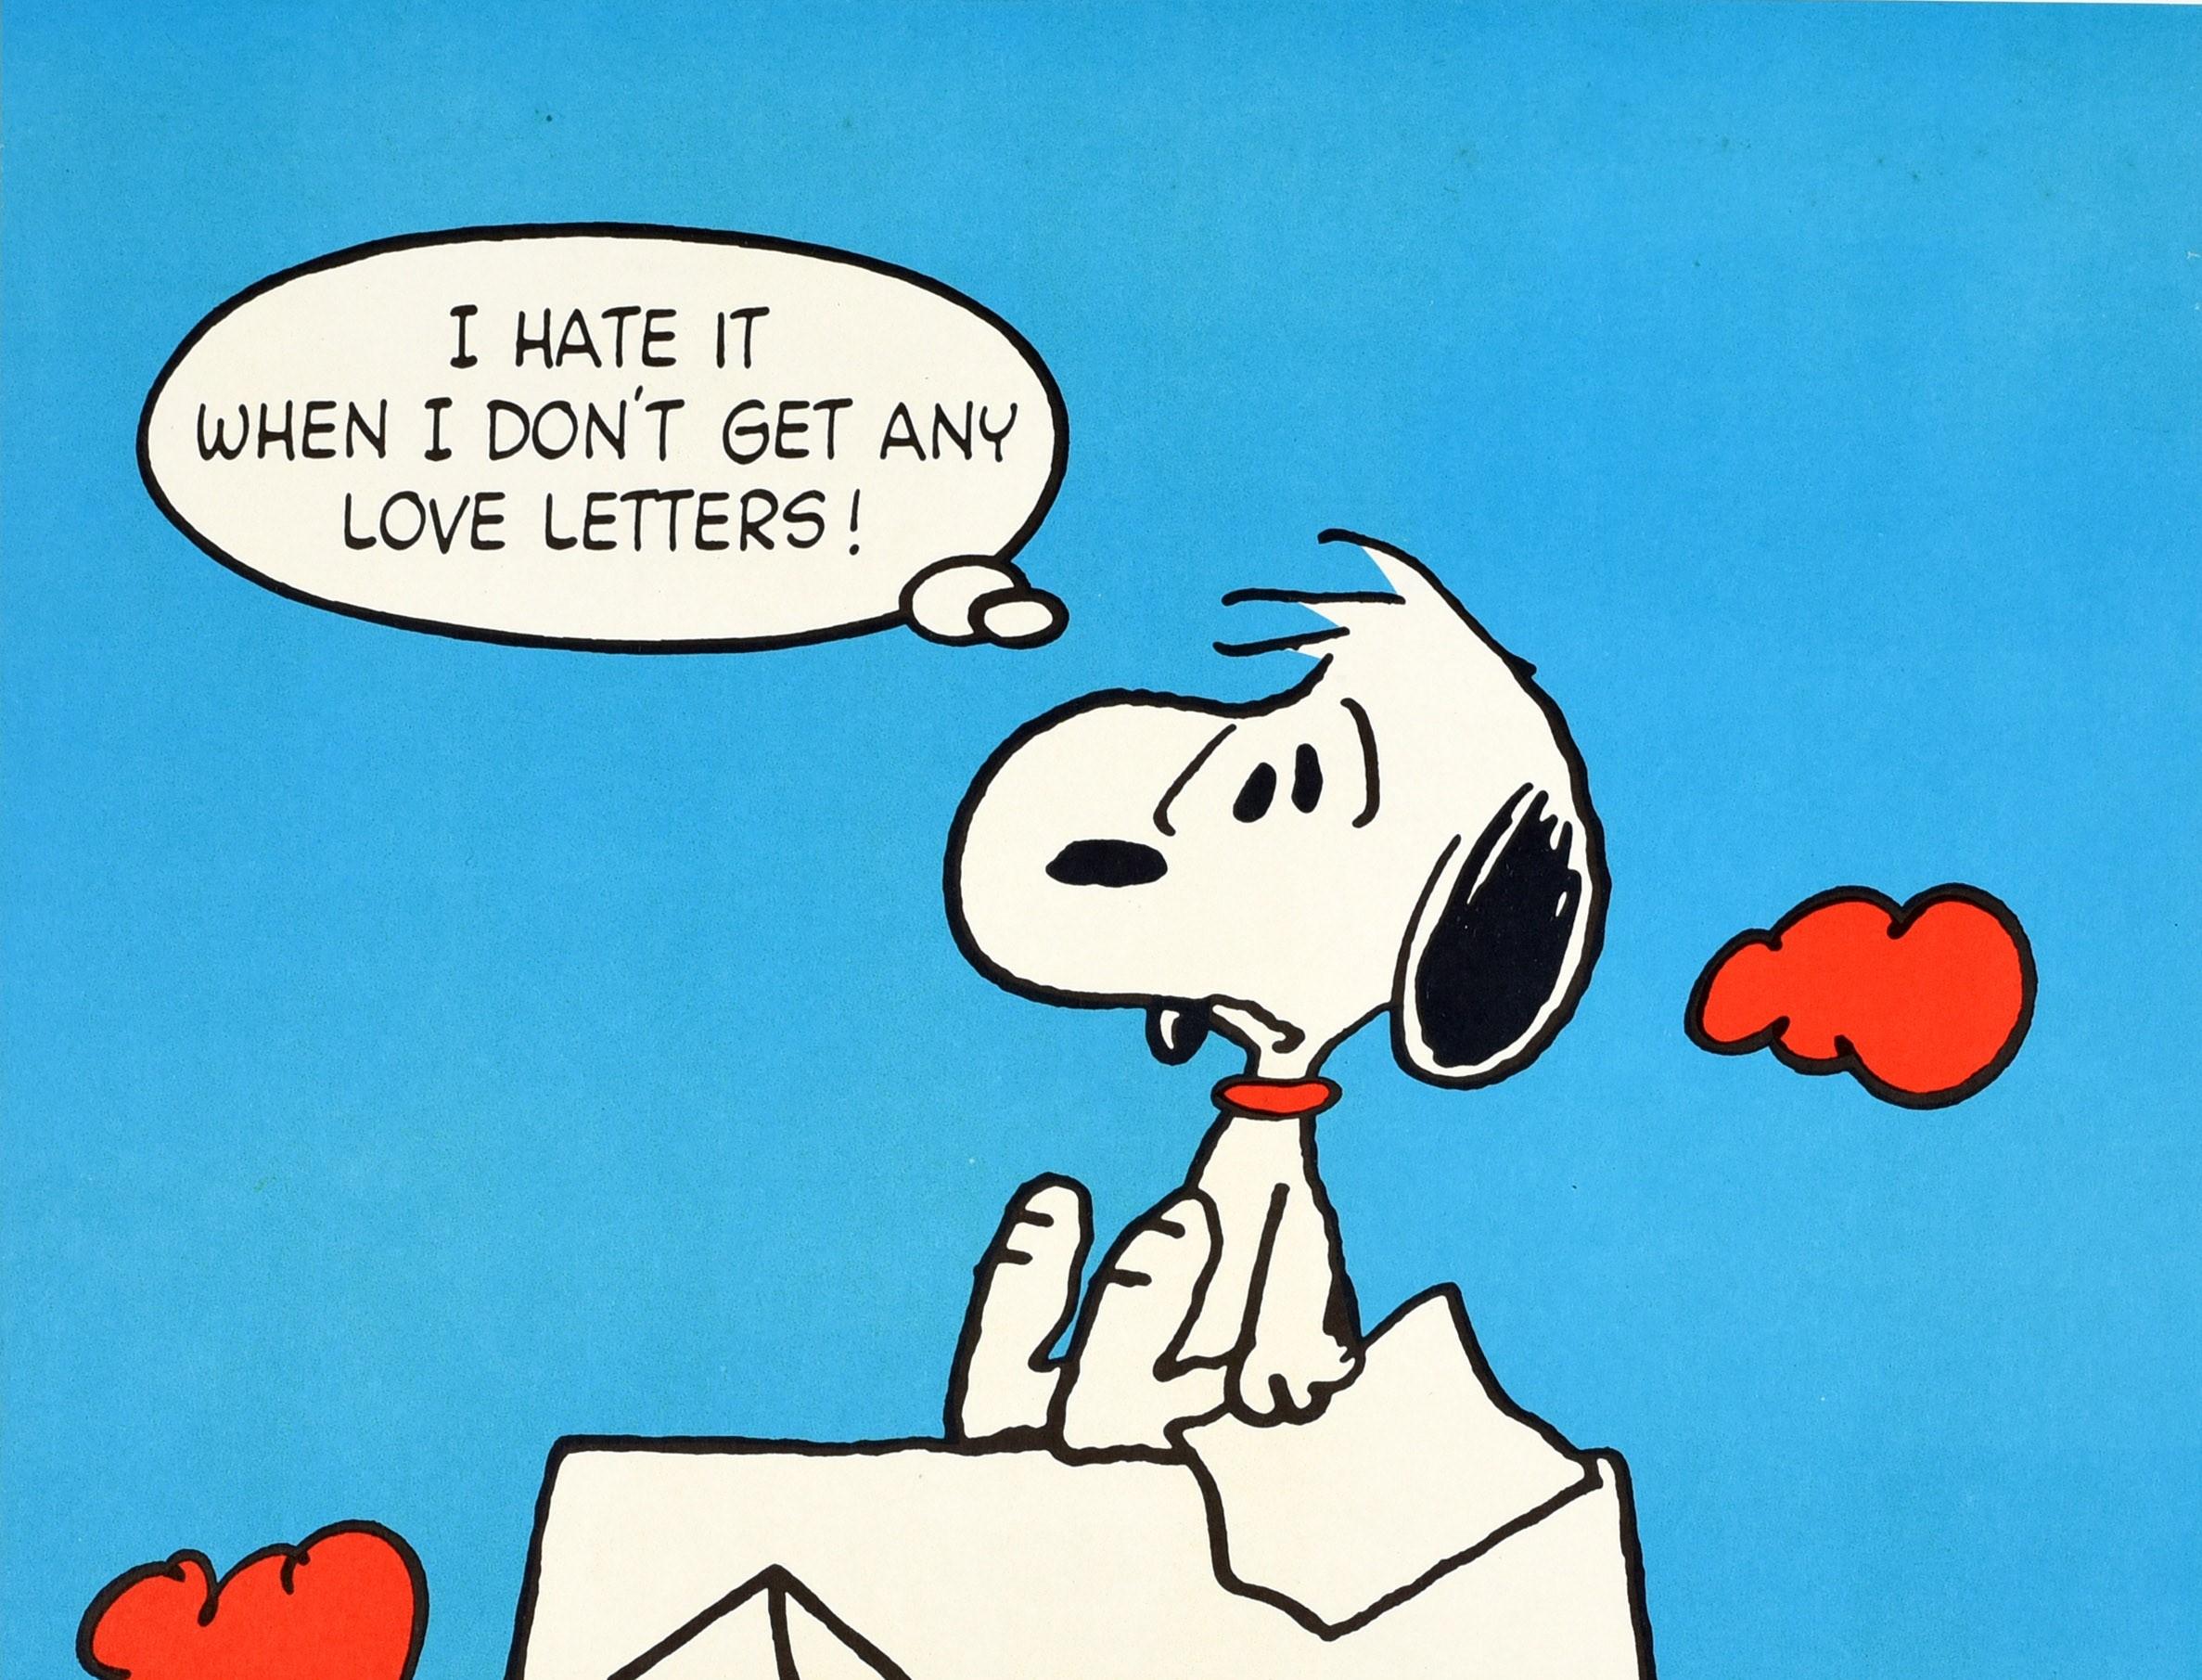 Original vintage poster featuring the iconic comic character Snoopy the Dog by the notable American cartoonist Charles M. Schulz (Charles Monroe Schulz; 1922-2000) - I Hate it When I Don't Get Any Love Letters! - featuring a cartoon design depicting